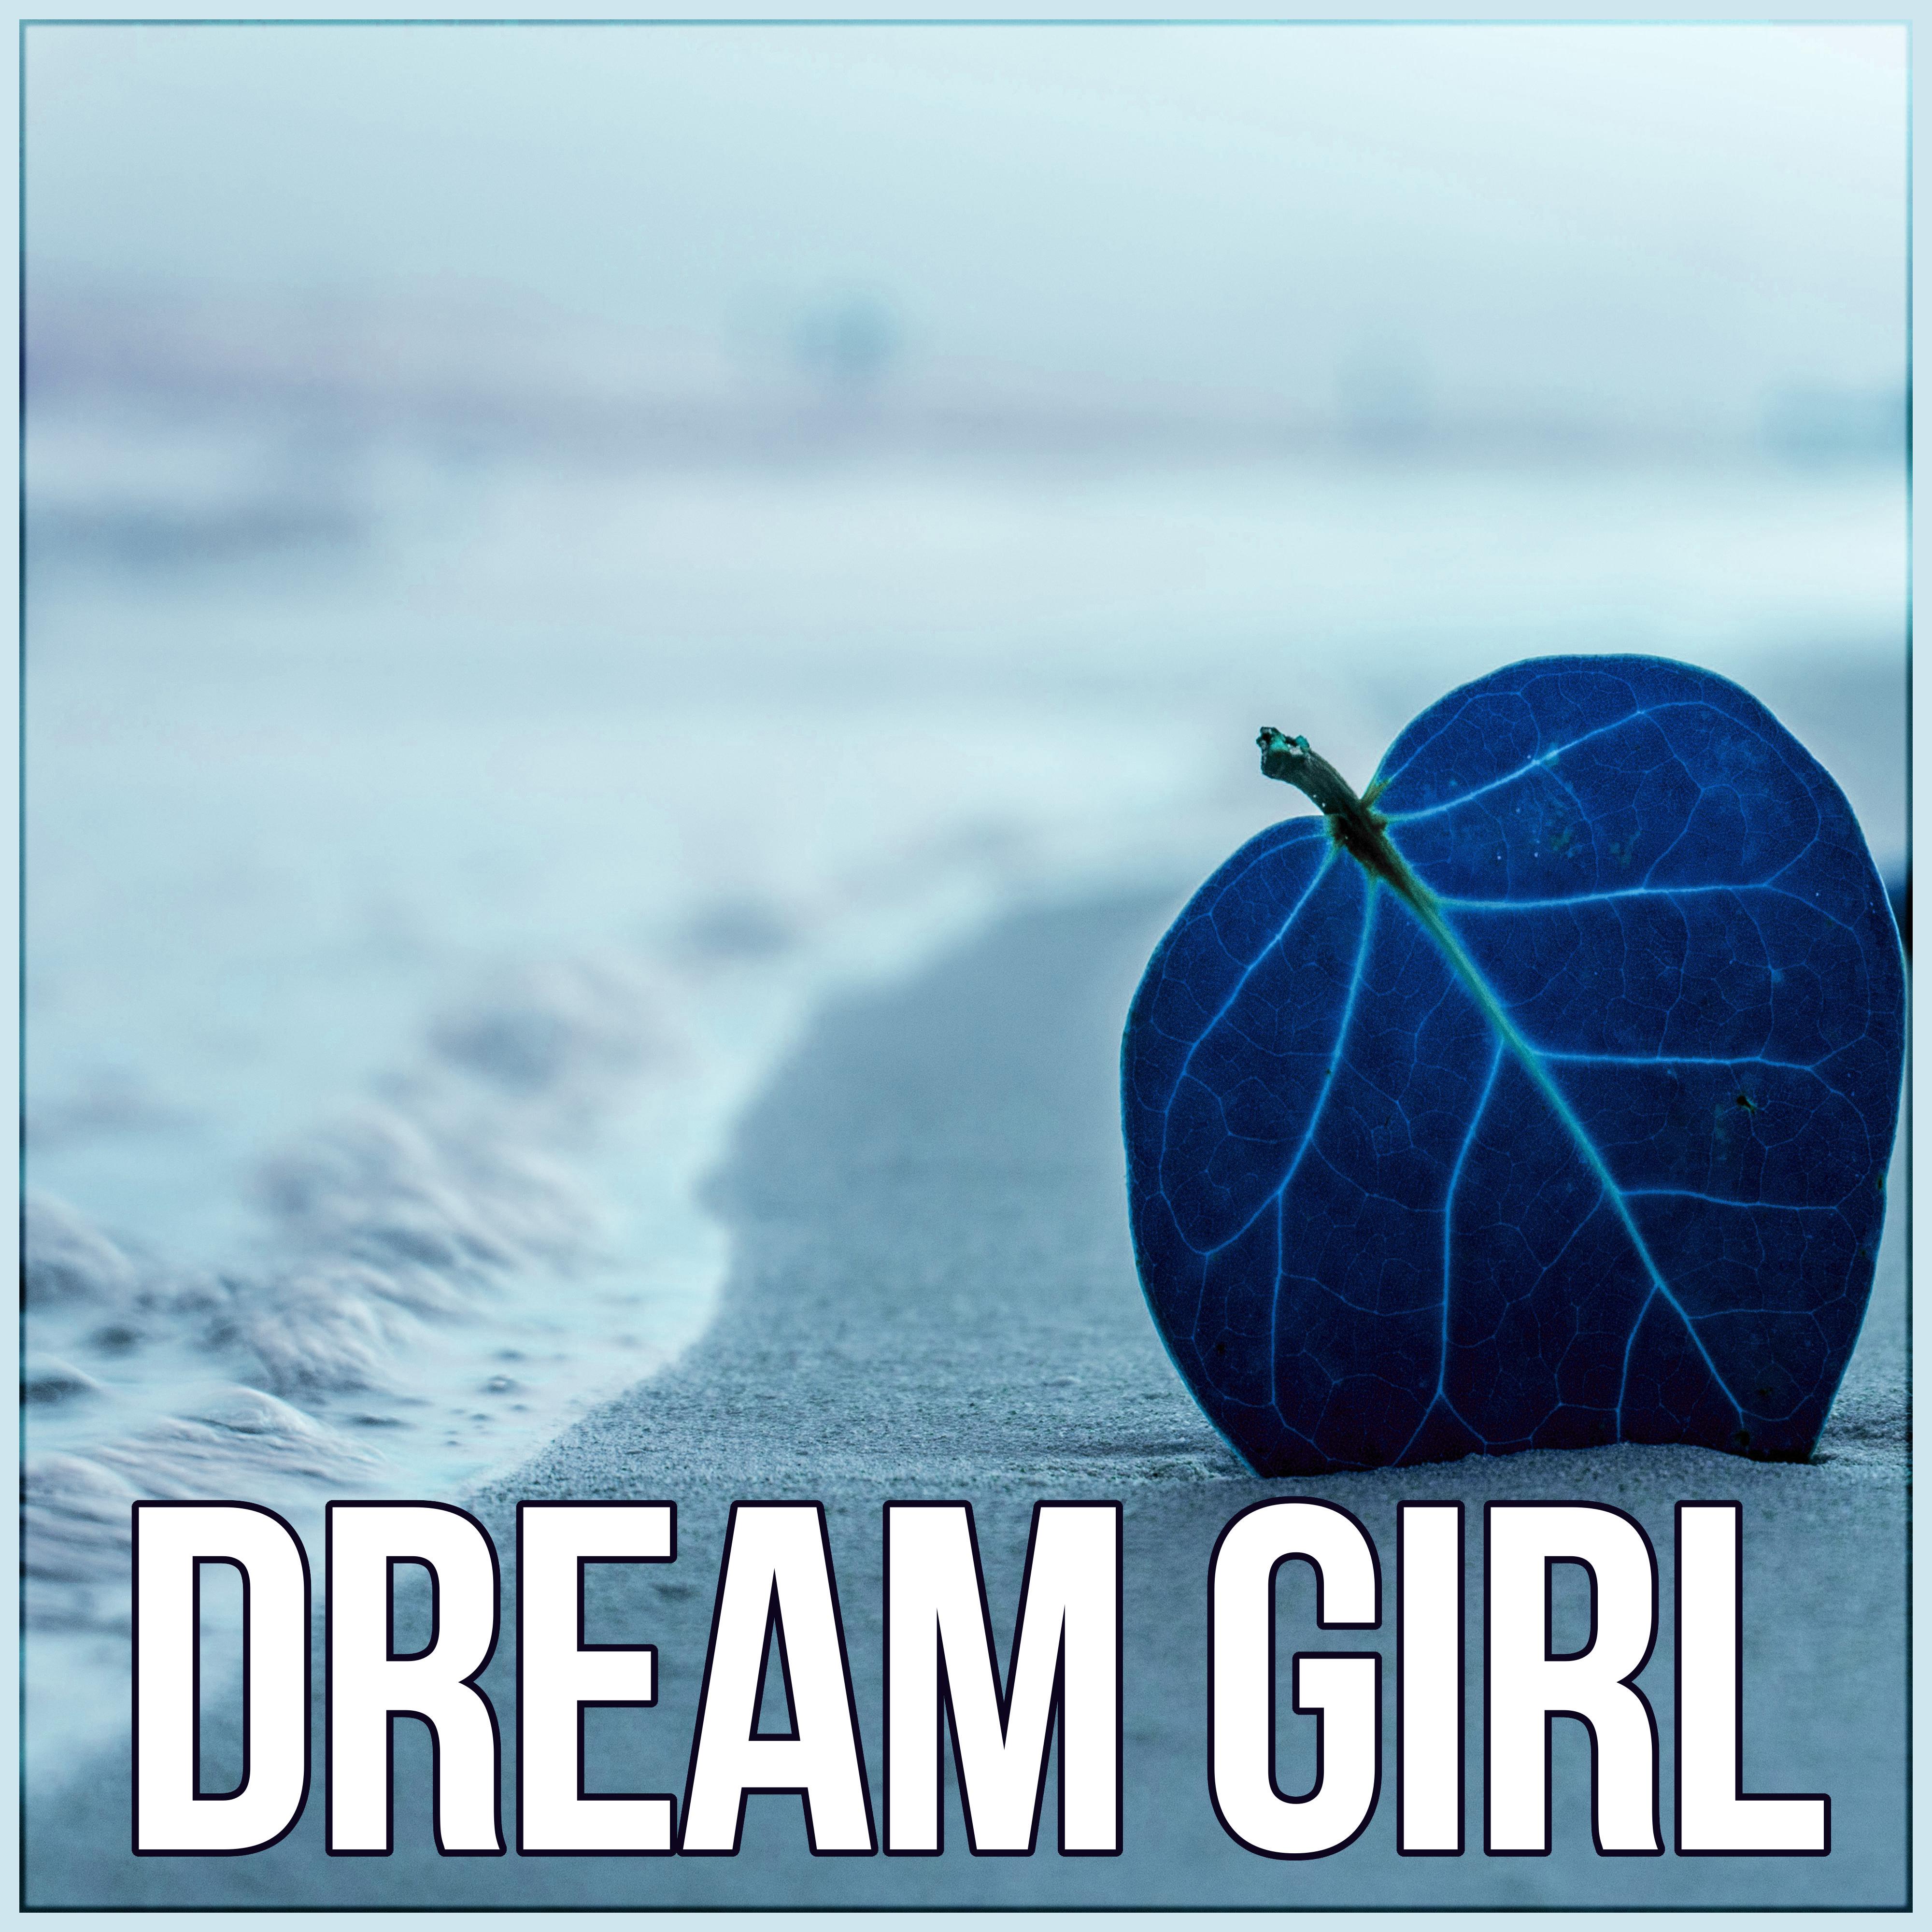 Dream Girl - Restful Sleep, Sounds of Nature, Chill Out Music, Healing Meditation, Total Relax